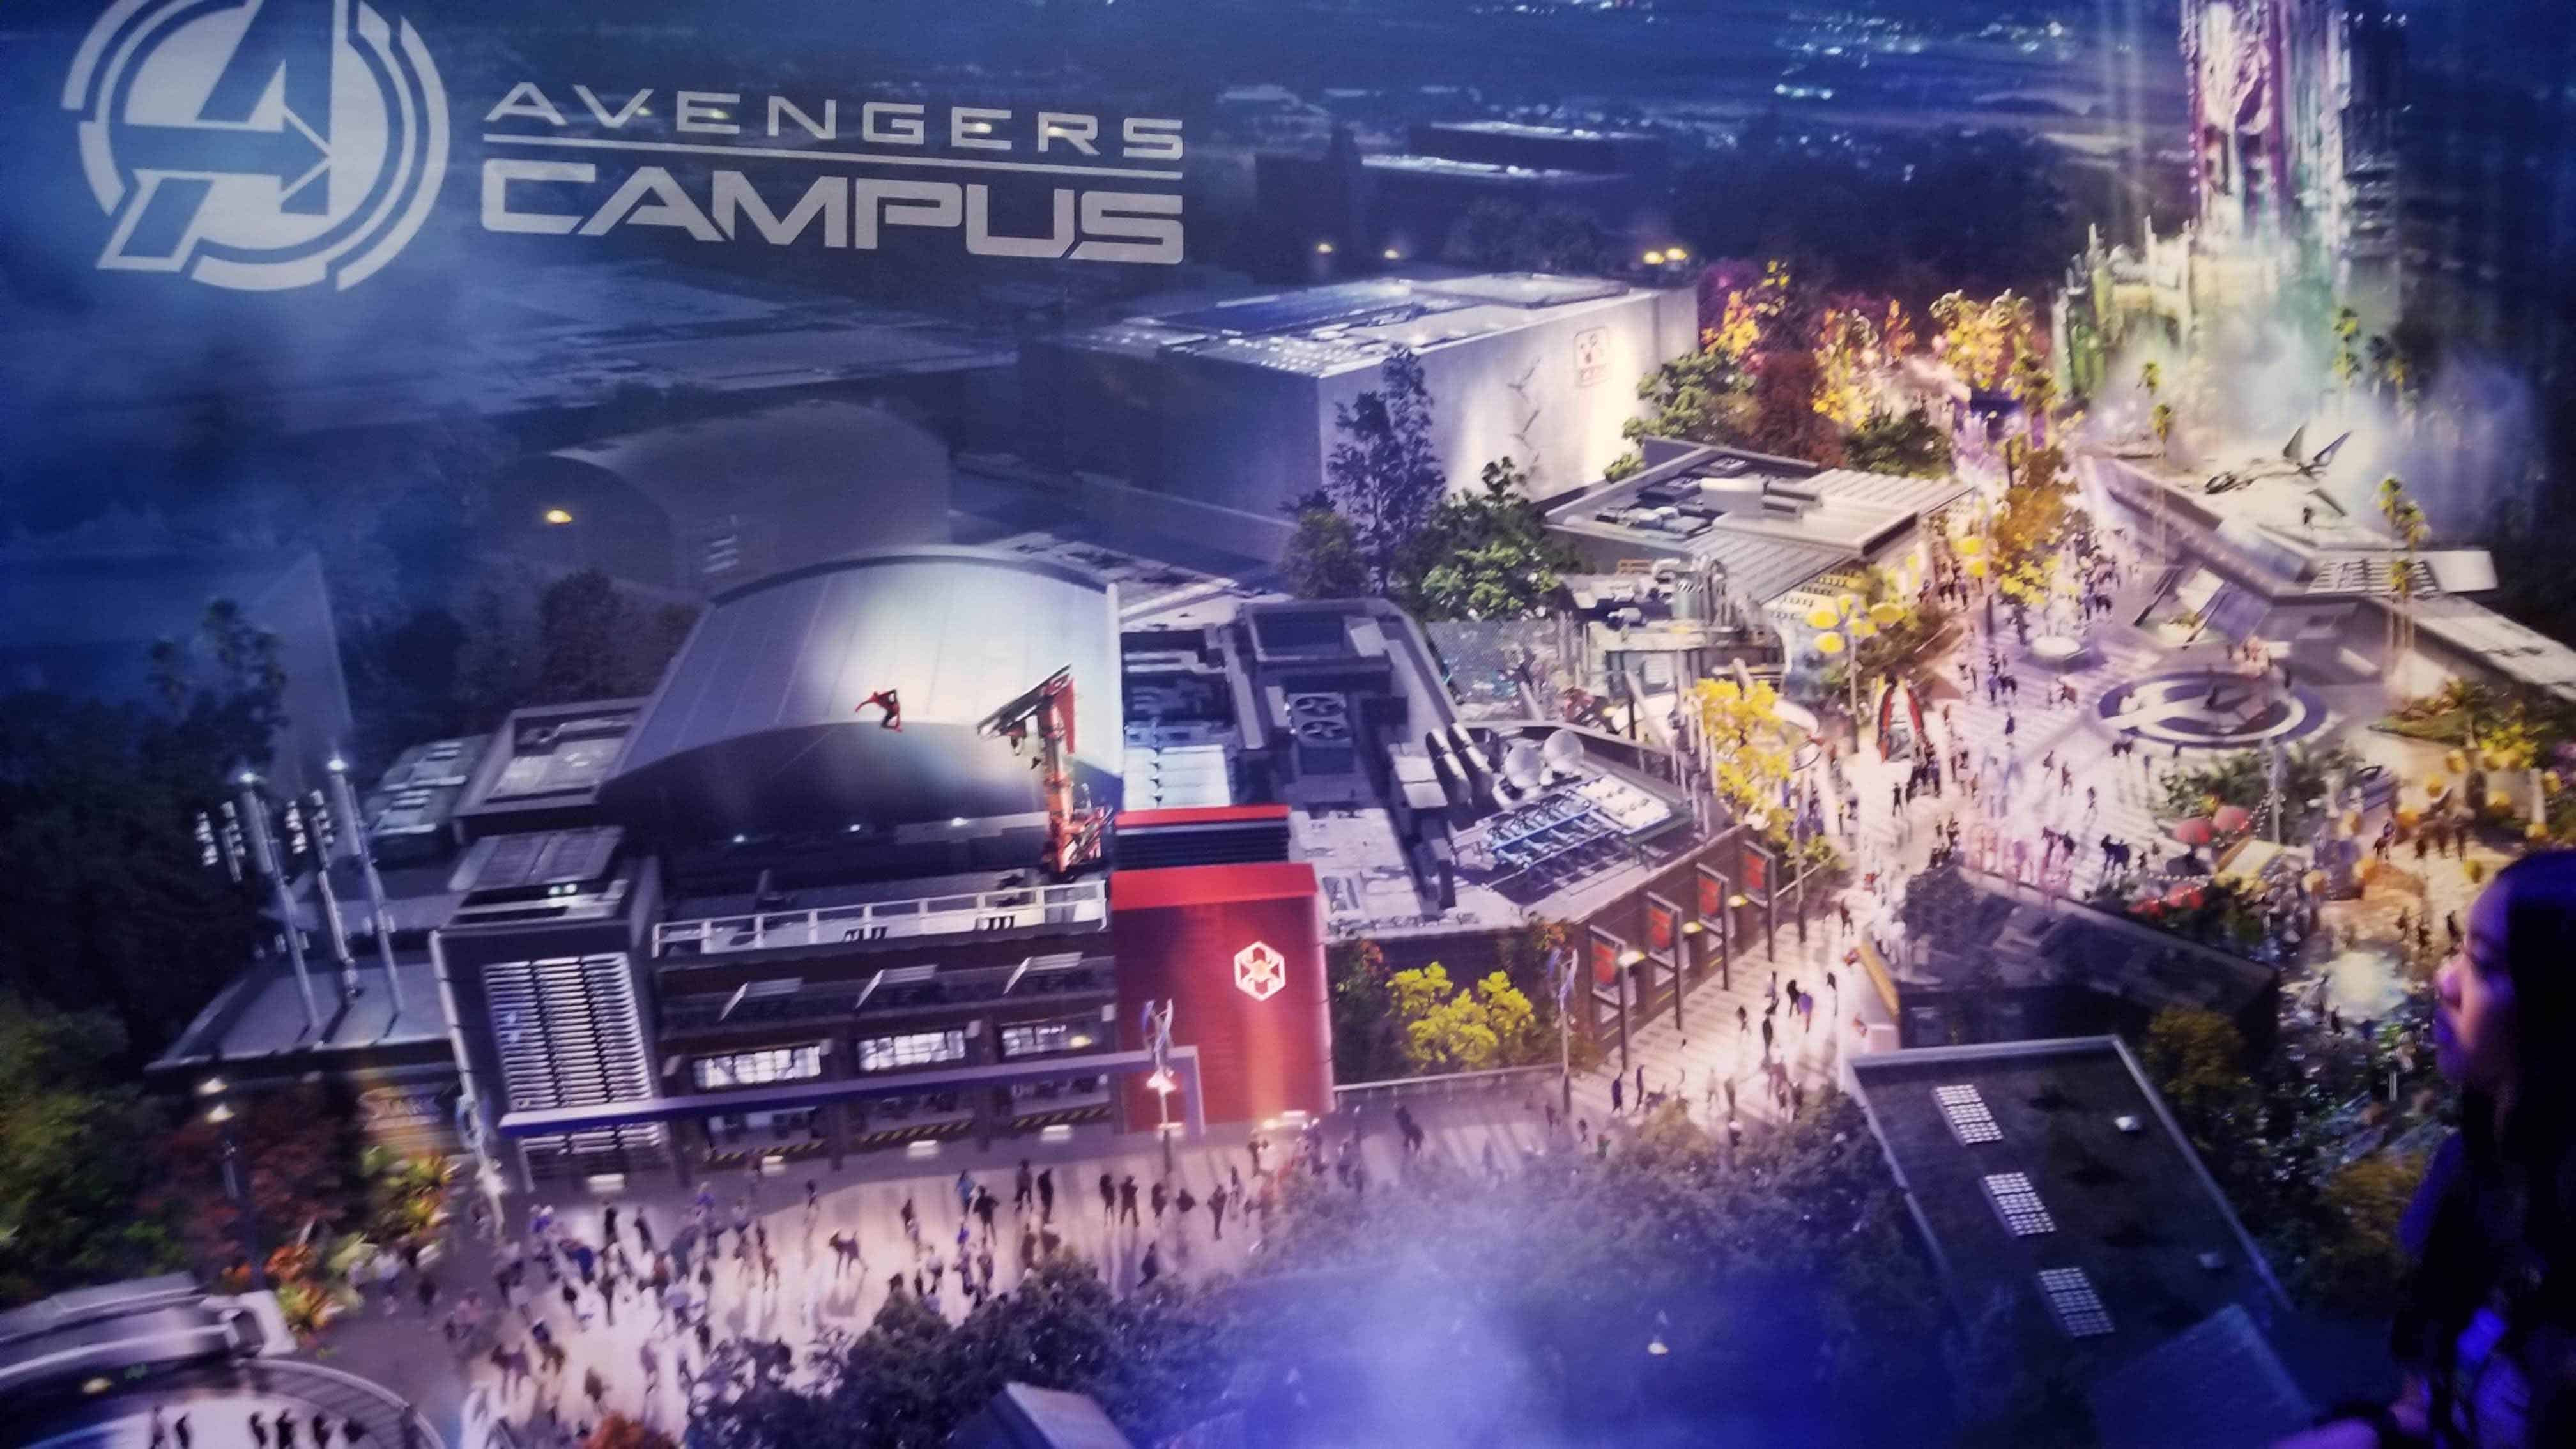 Marvel and Avengers Campus News from D23 Expo